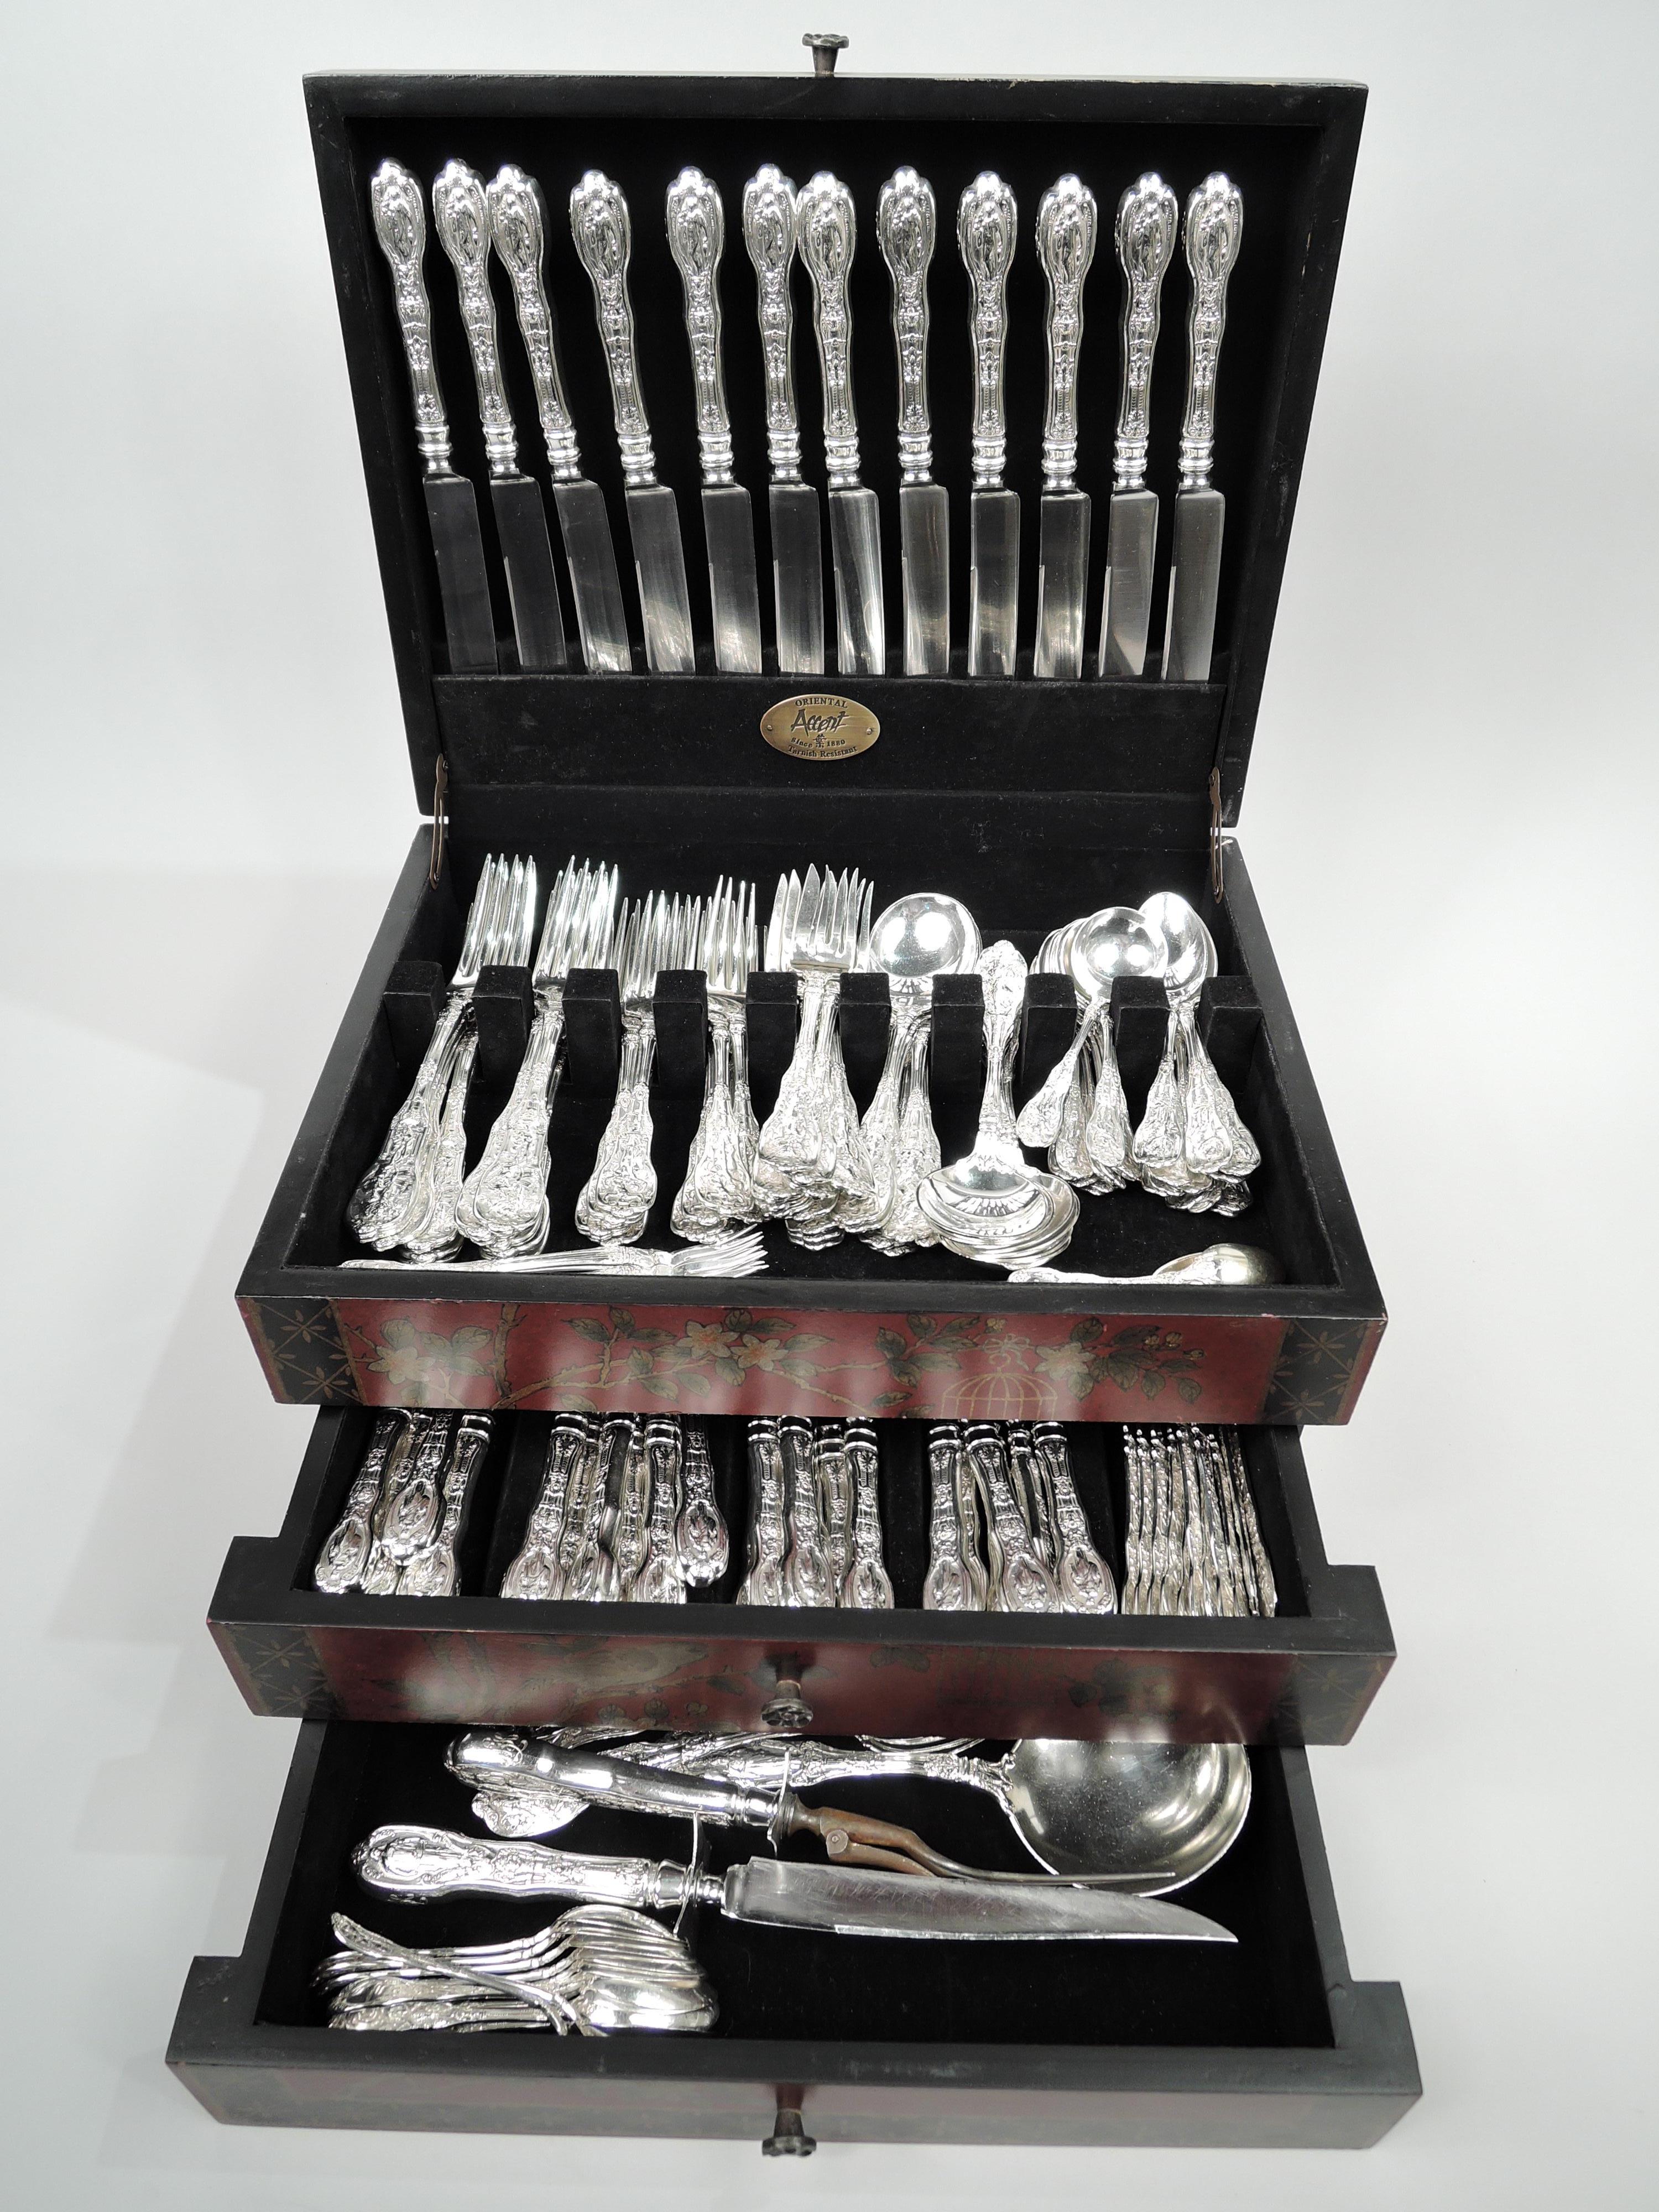 Mythologique sterling silver dinner and luncheon set. Made by Gorham in Providence, ca 1920. This set comprises 162 pieces (dimensions in inches):

Forks: 12 dinner forks (8), 12 luncheon forks (7/18), 12 salad forks (7), and 11 seafood forks (6);